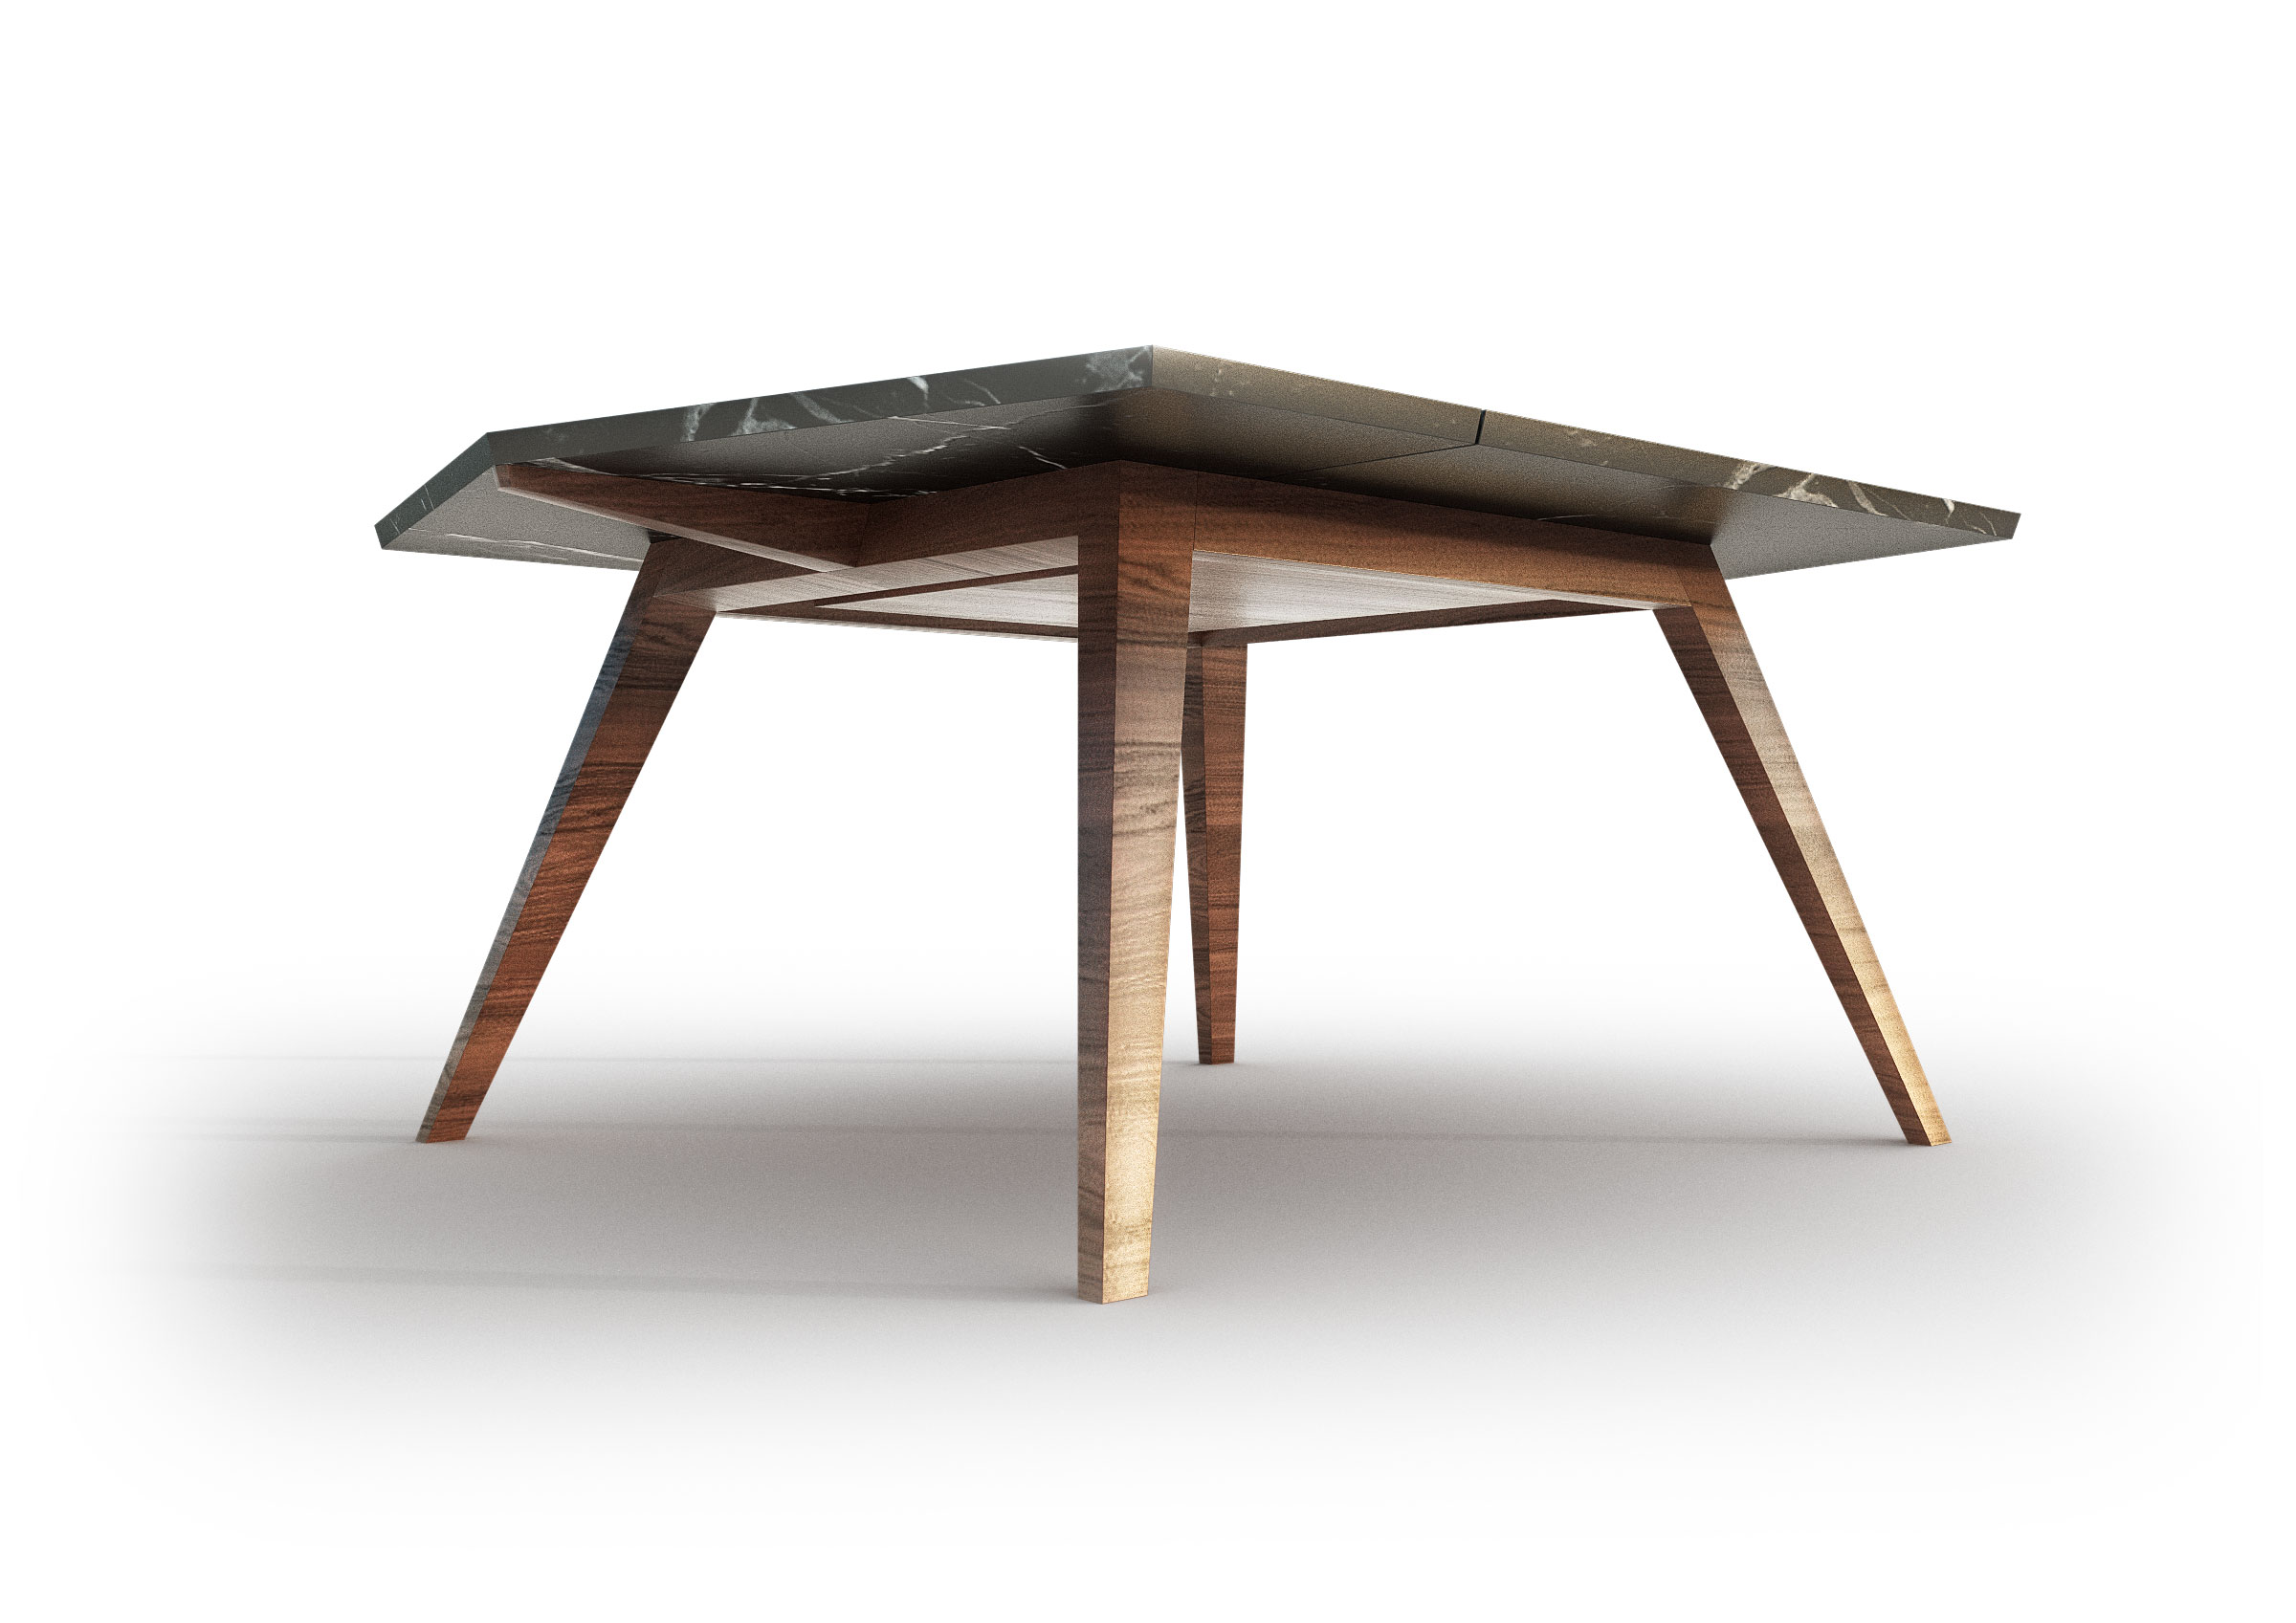 cy-architecture_granite&wood-table_vis-frontal-view